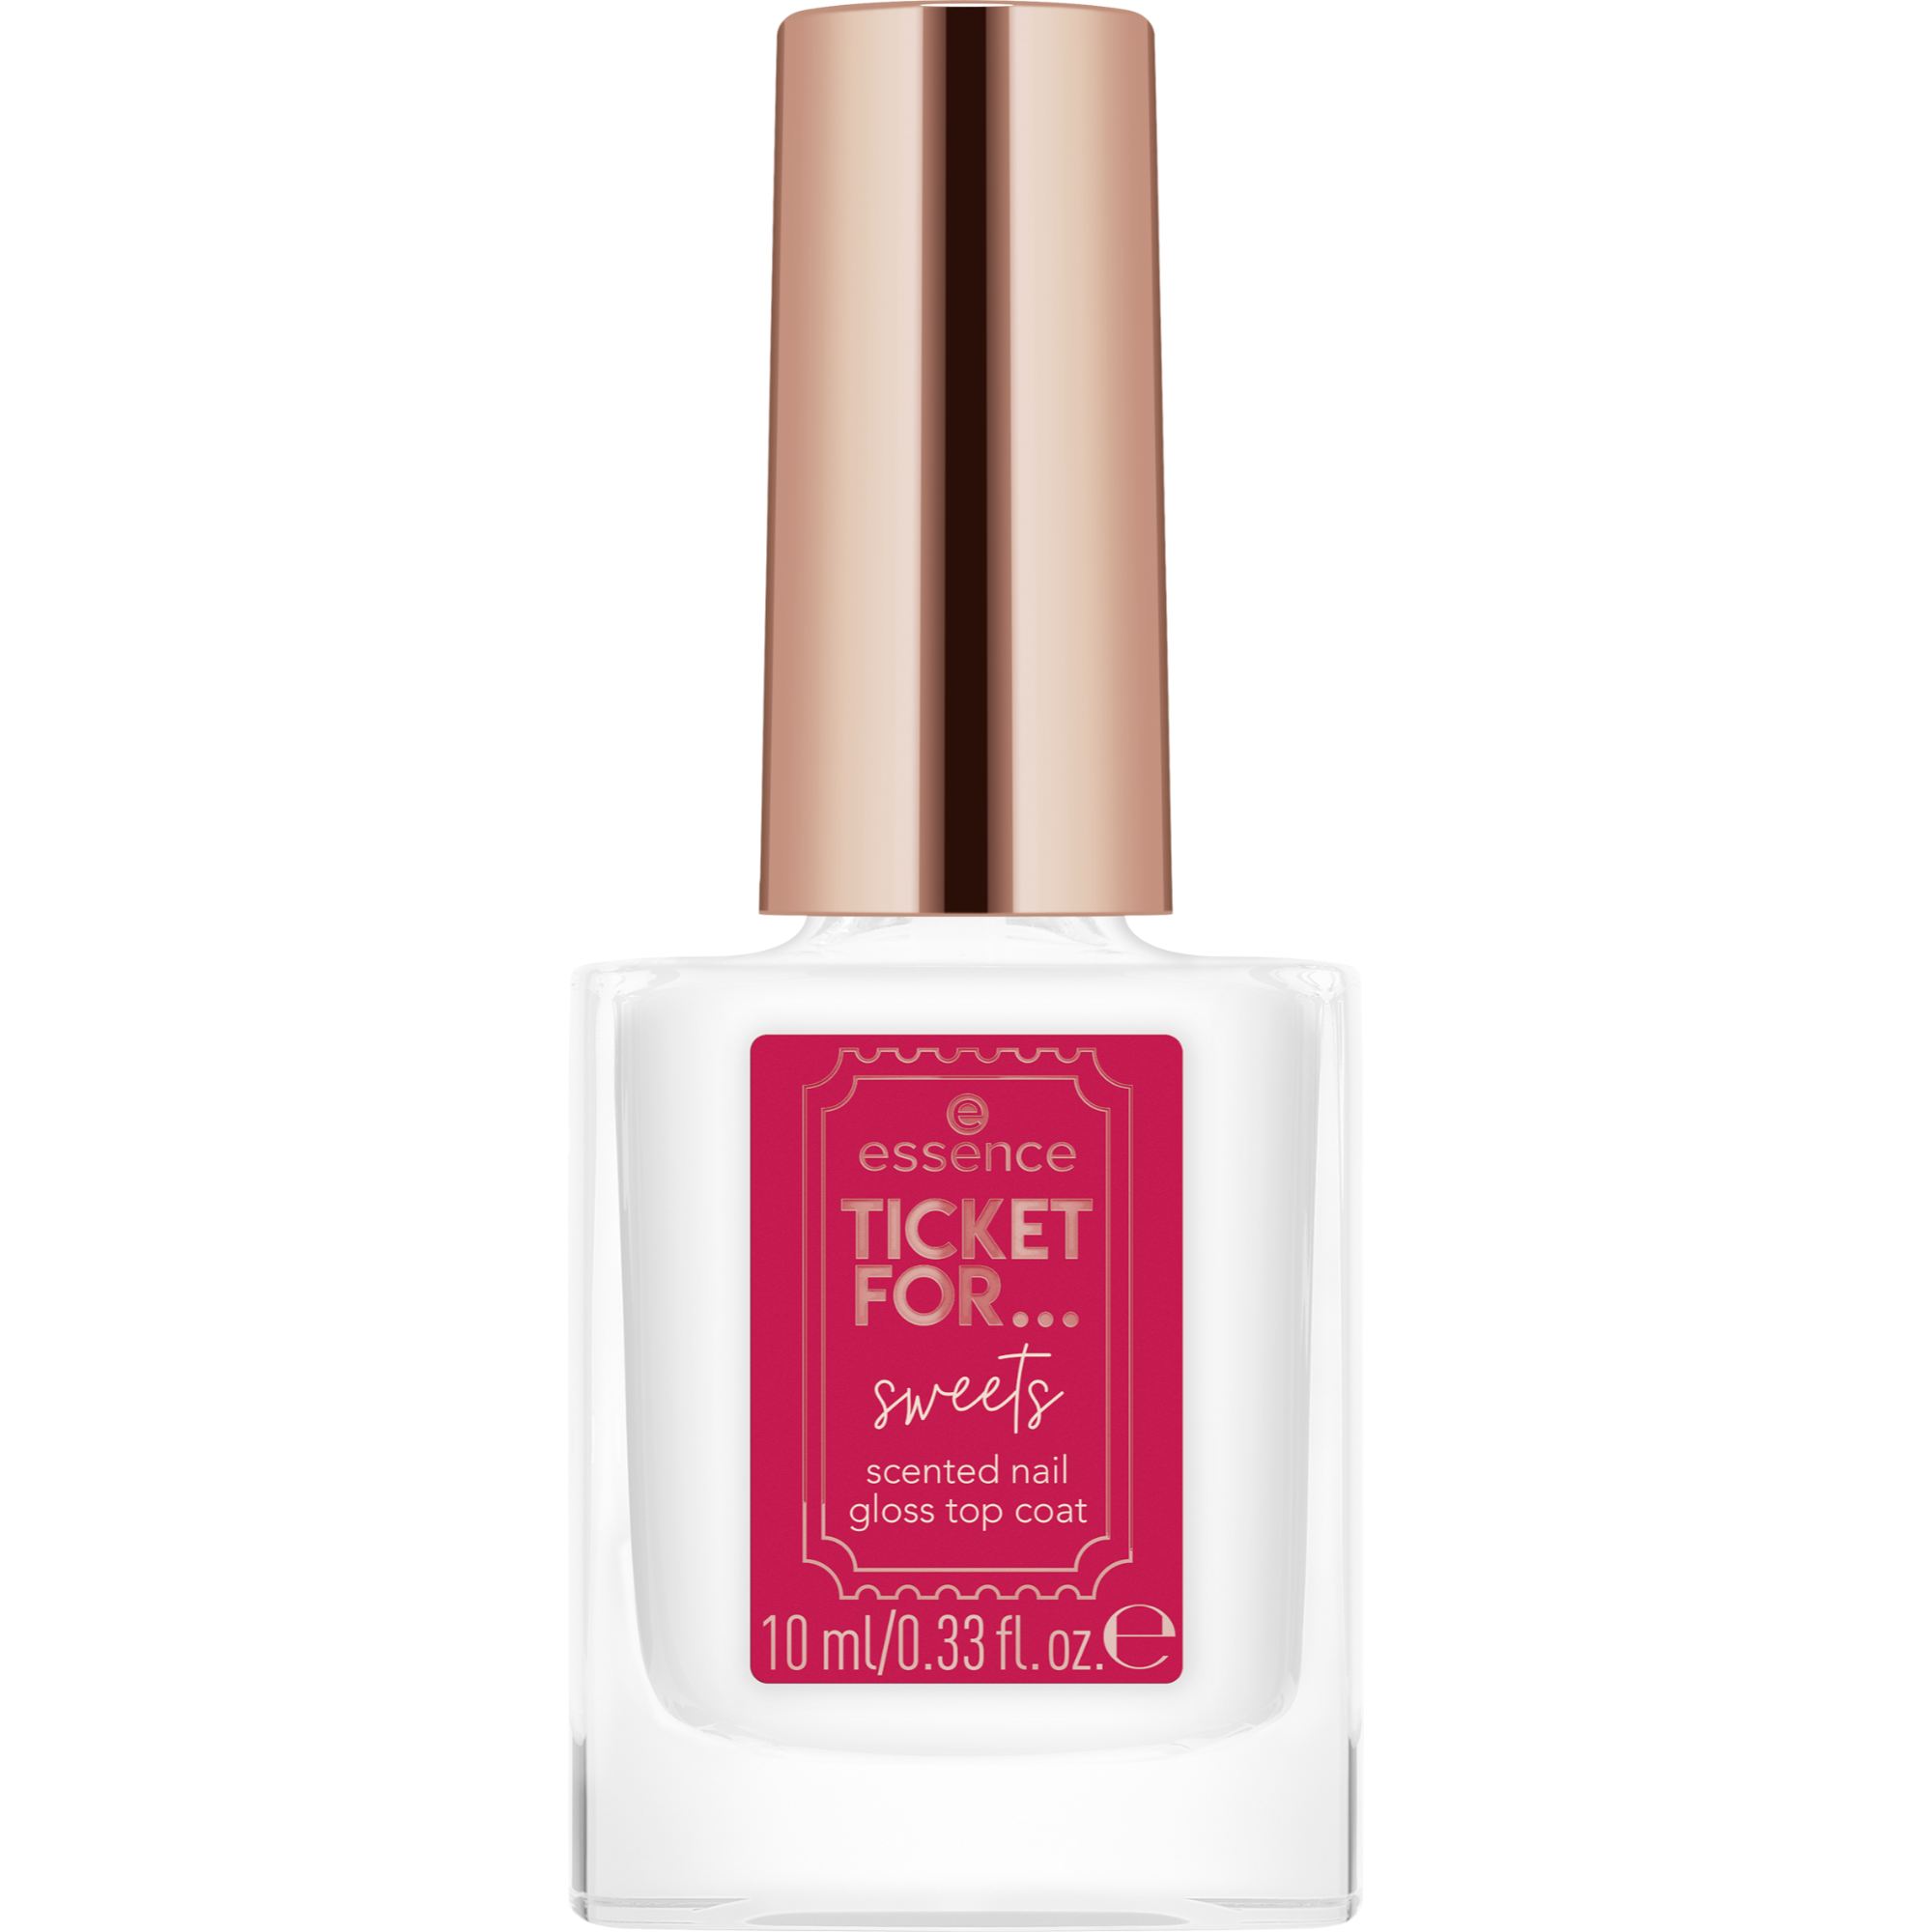 TICKET FOR... sweets scented nail gloss top coat